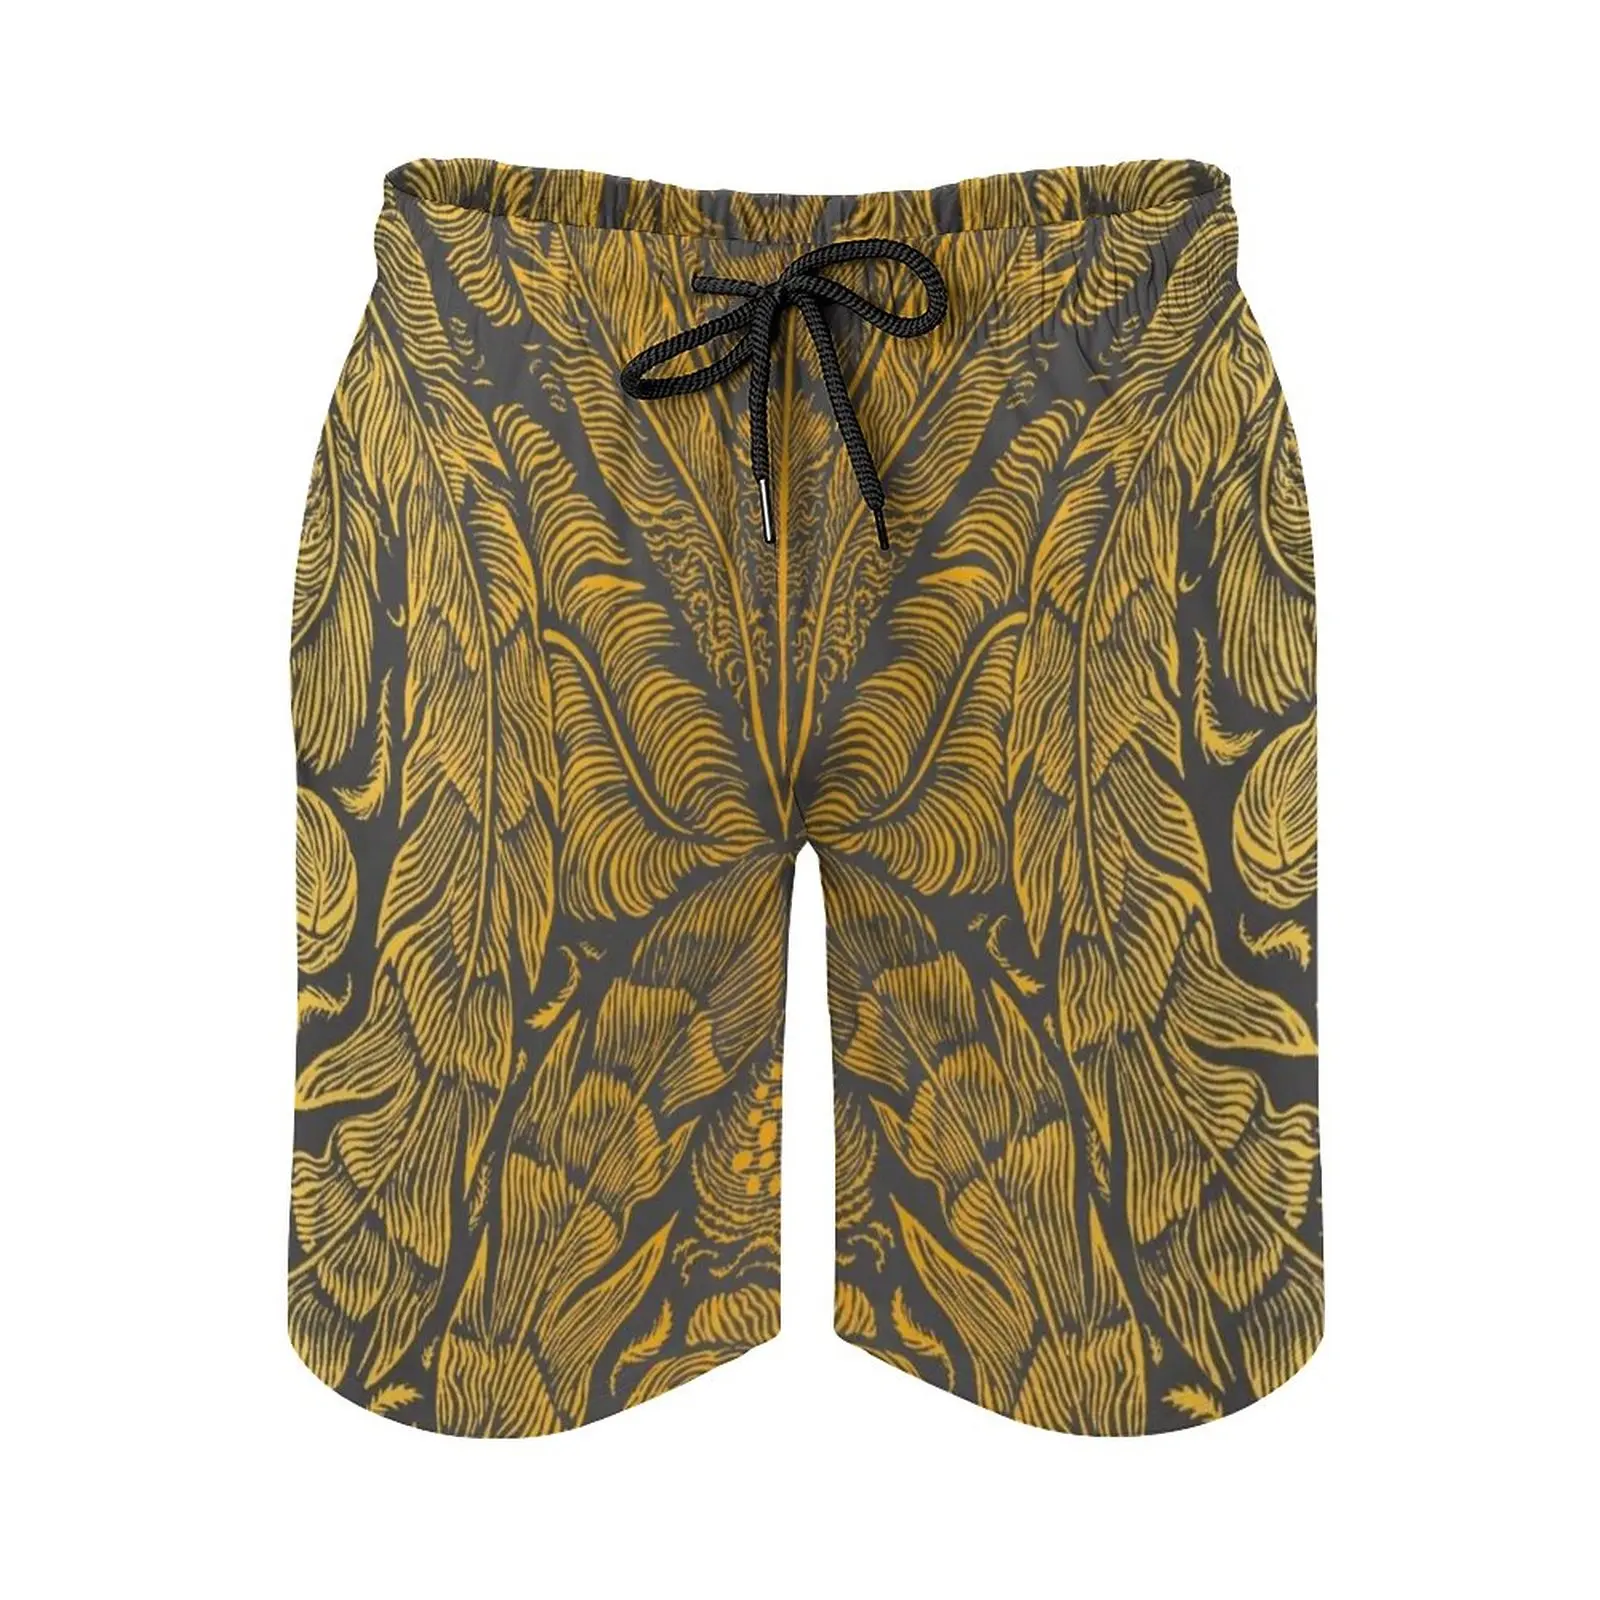 

Plumage-- Yellow & Grey Men's Sports Short Beach Shorts Surfing Swimming Boxer Trunks Bathing Damask Feathers Birds Graphic